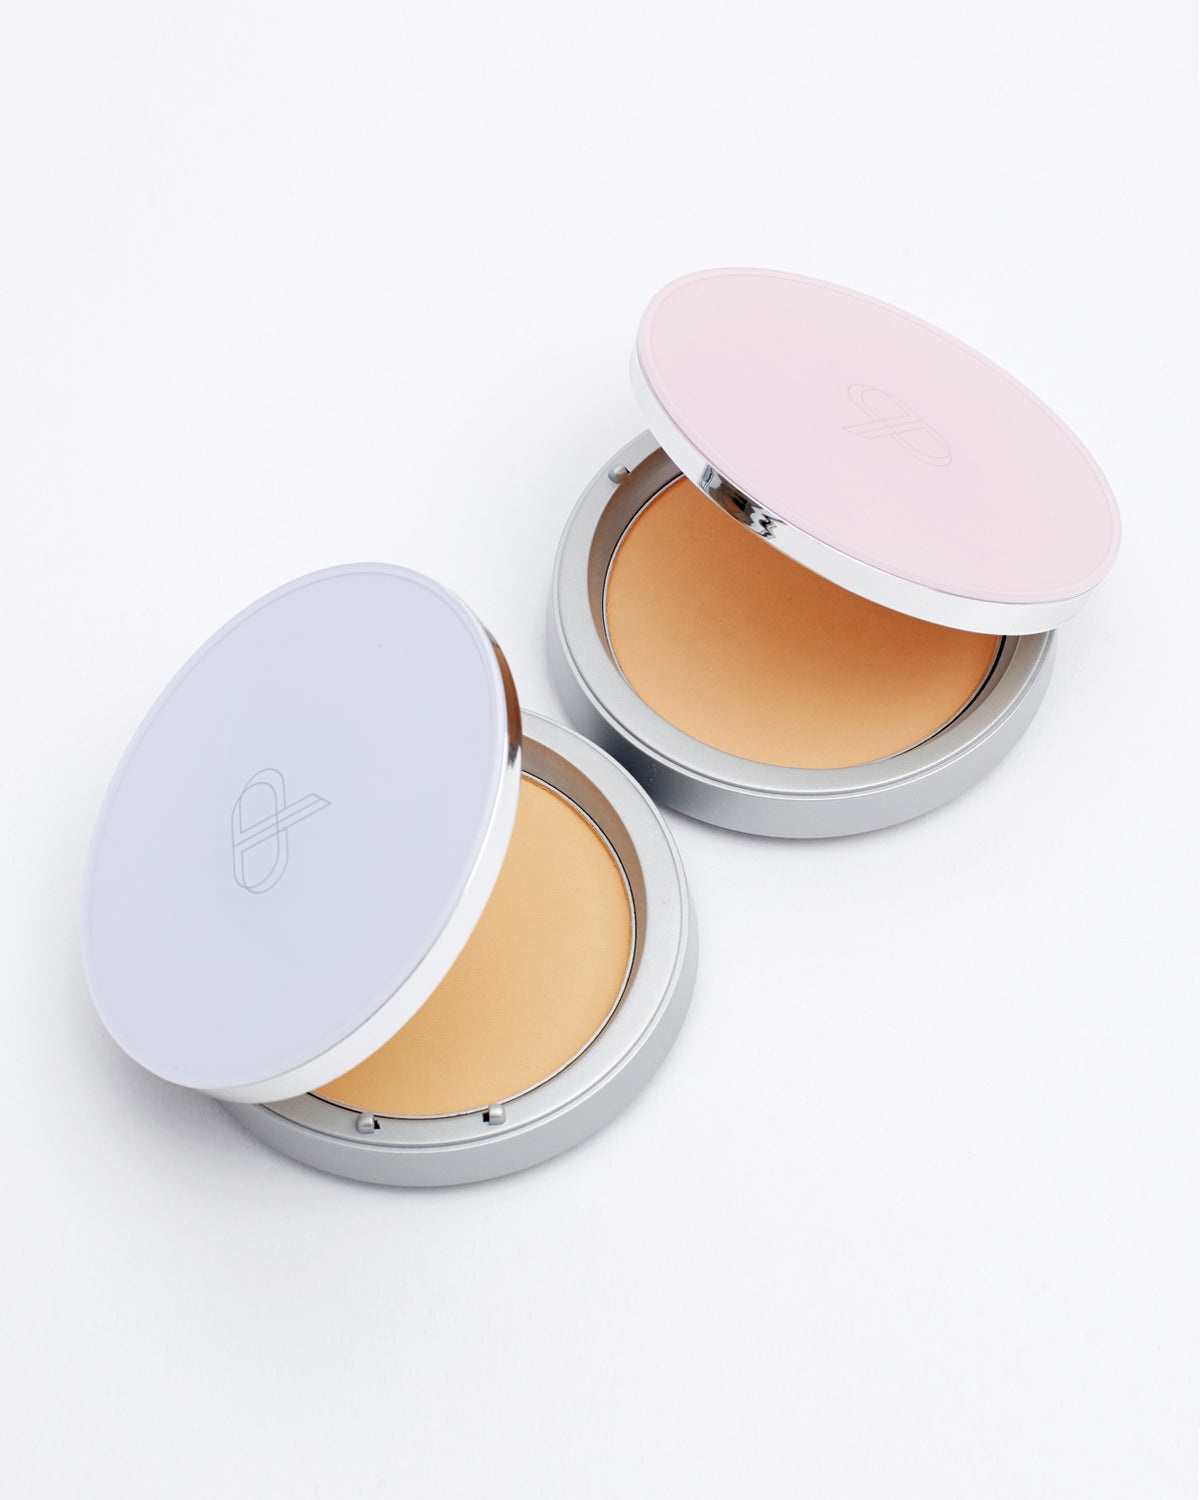 Flawless and Matte All Day Long  This lightweight pressed powder pact helps cover imperfection, controls excessive sebum, and refines the appearance of the skin. Enriched with micro-fine pigments to leave your complexion looking flawless and matte all day long. 